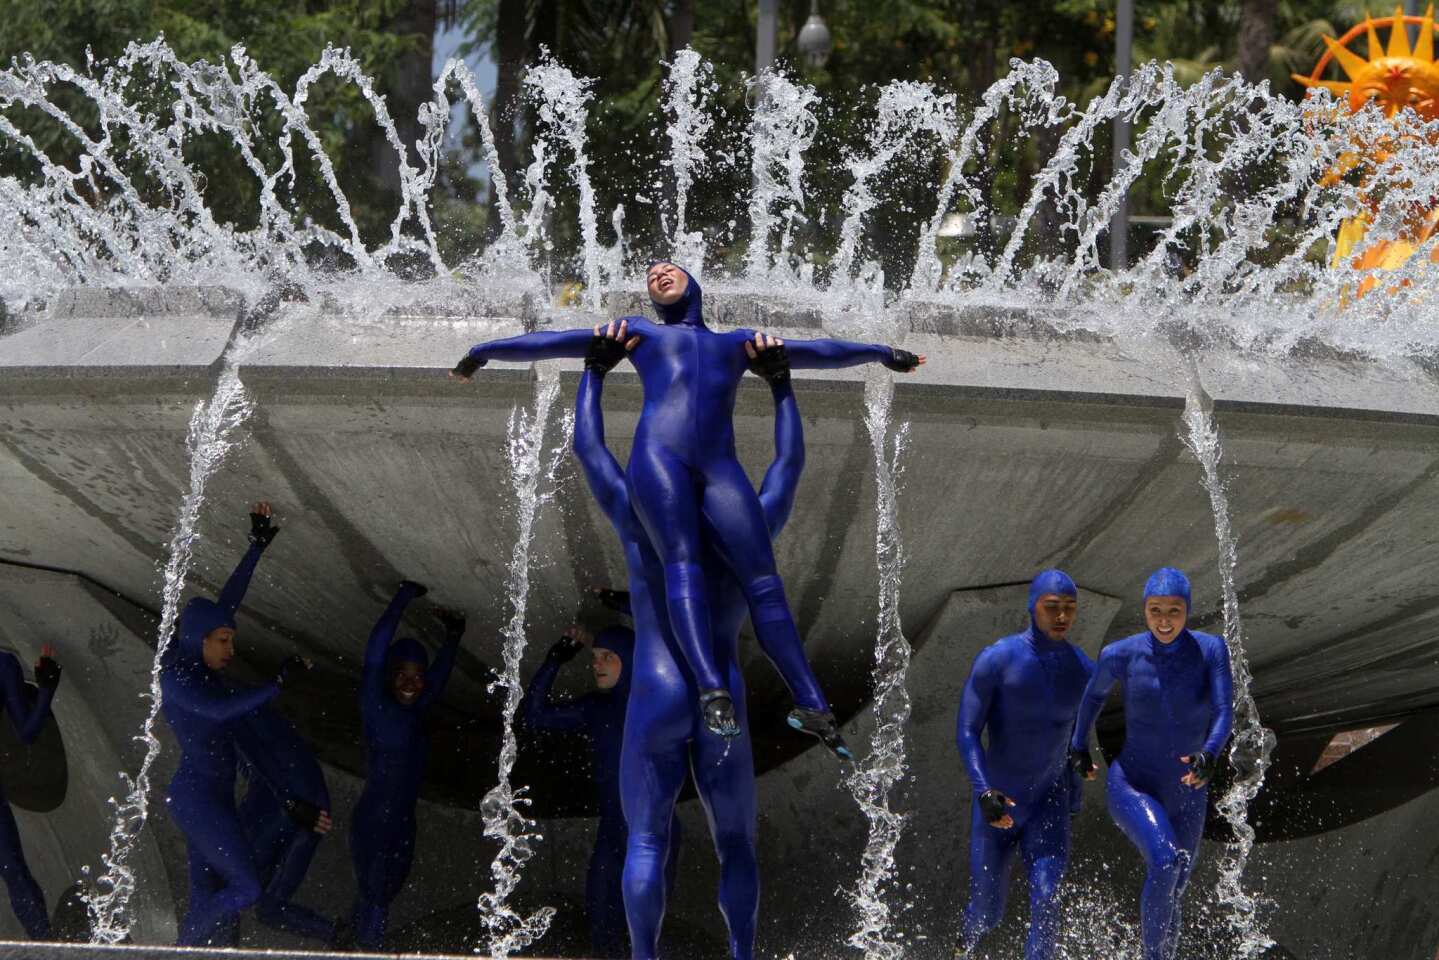 Dancers perform in the renovated Arthur J. Will Memorial Fountain during the ceremony marking the opening of Grand Park. The hour-long event also included live music, a reading from California's poet laureate and speeches from city and county leaders, who called the 12-acre park a major milestone in downtown's revitalization.